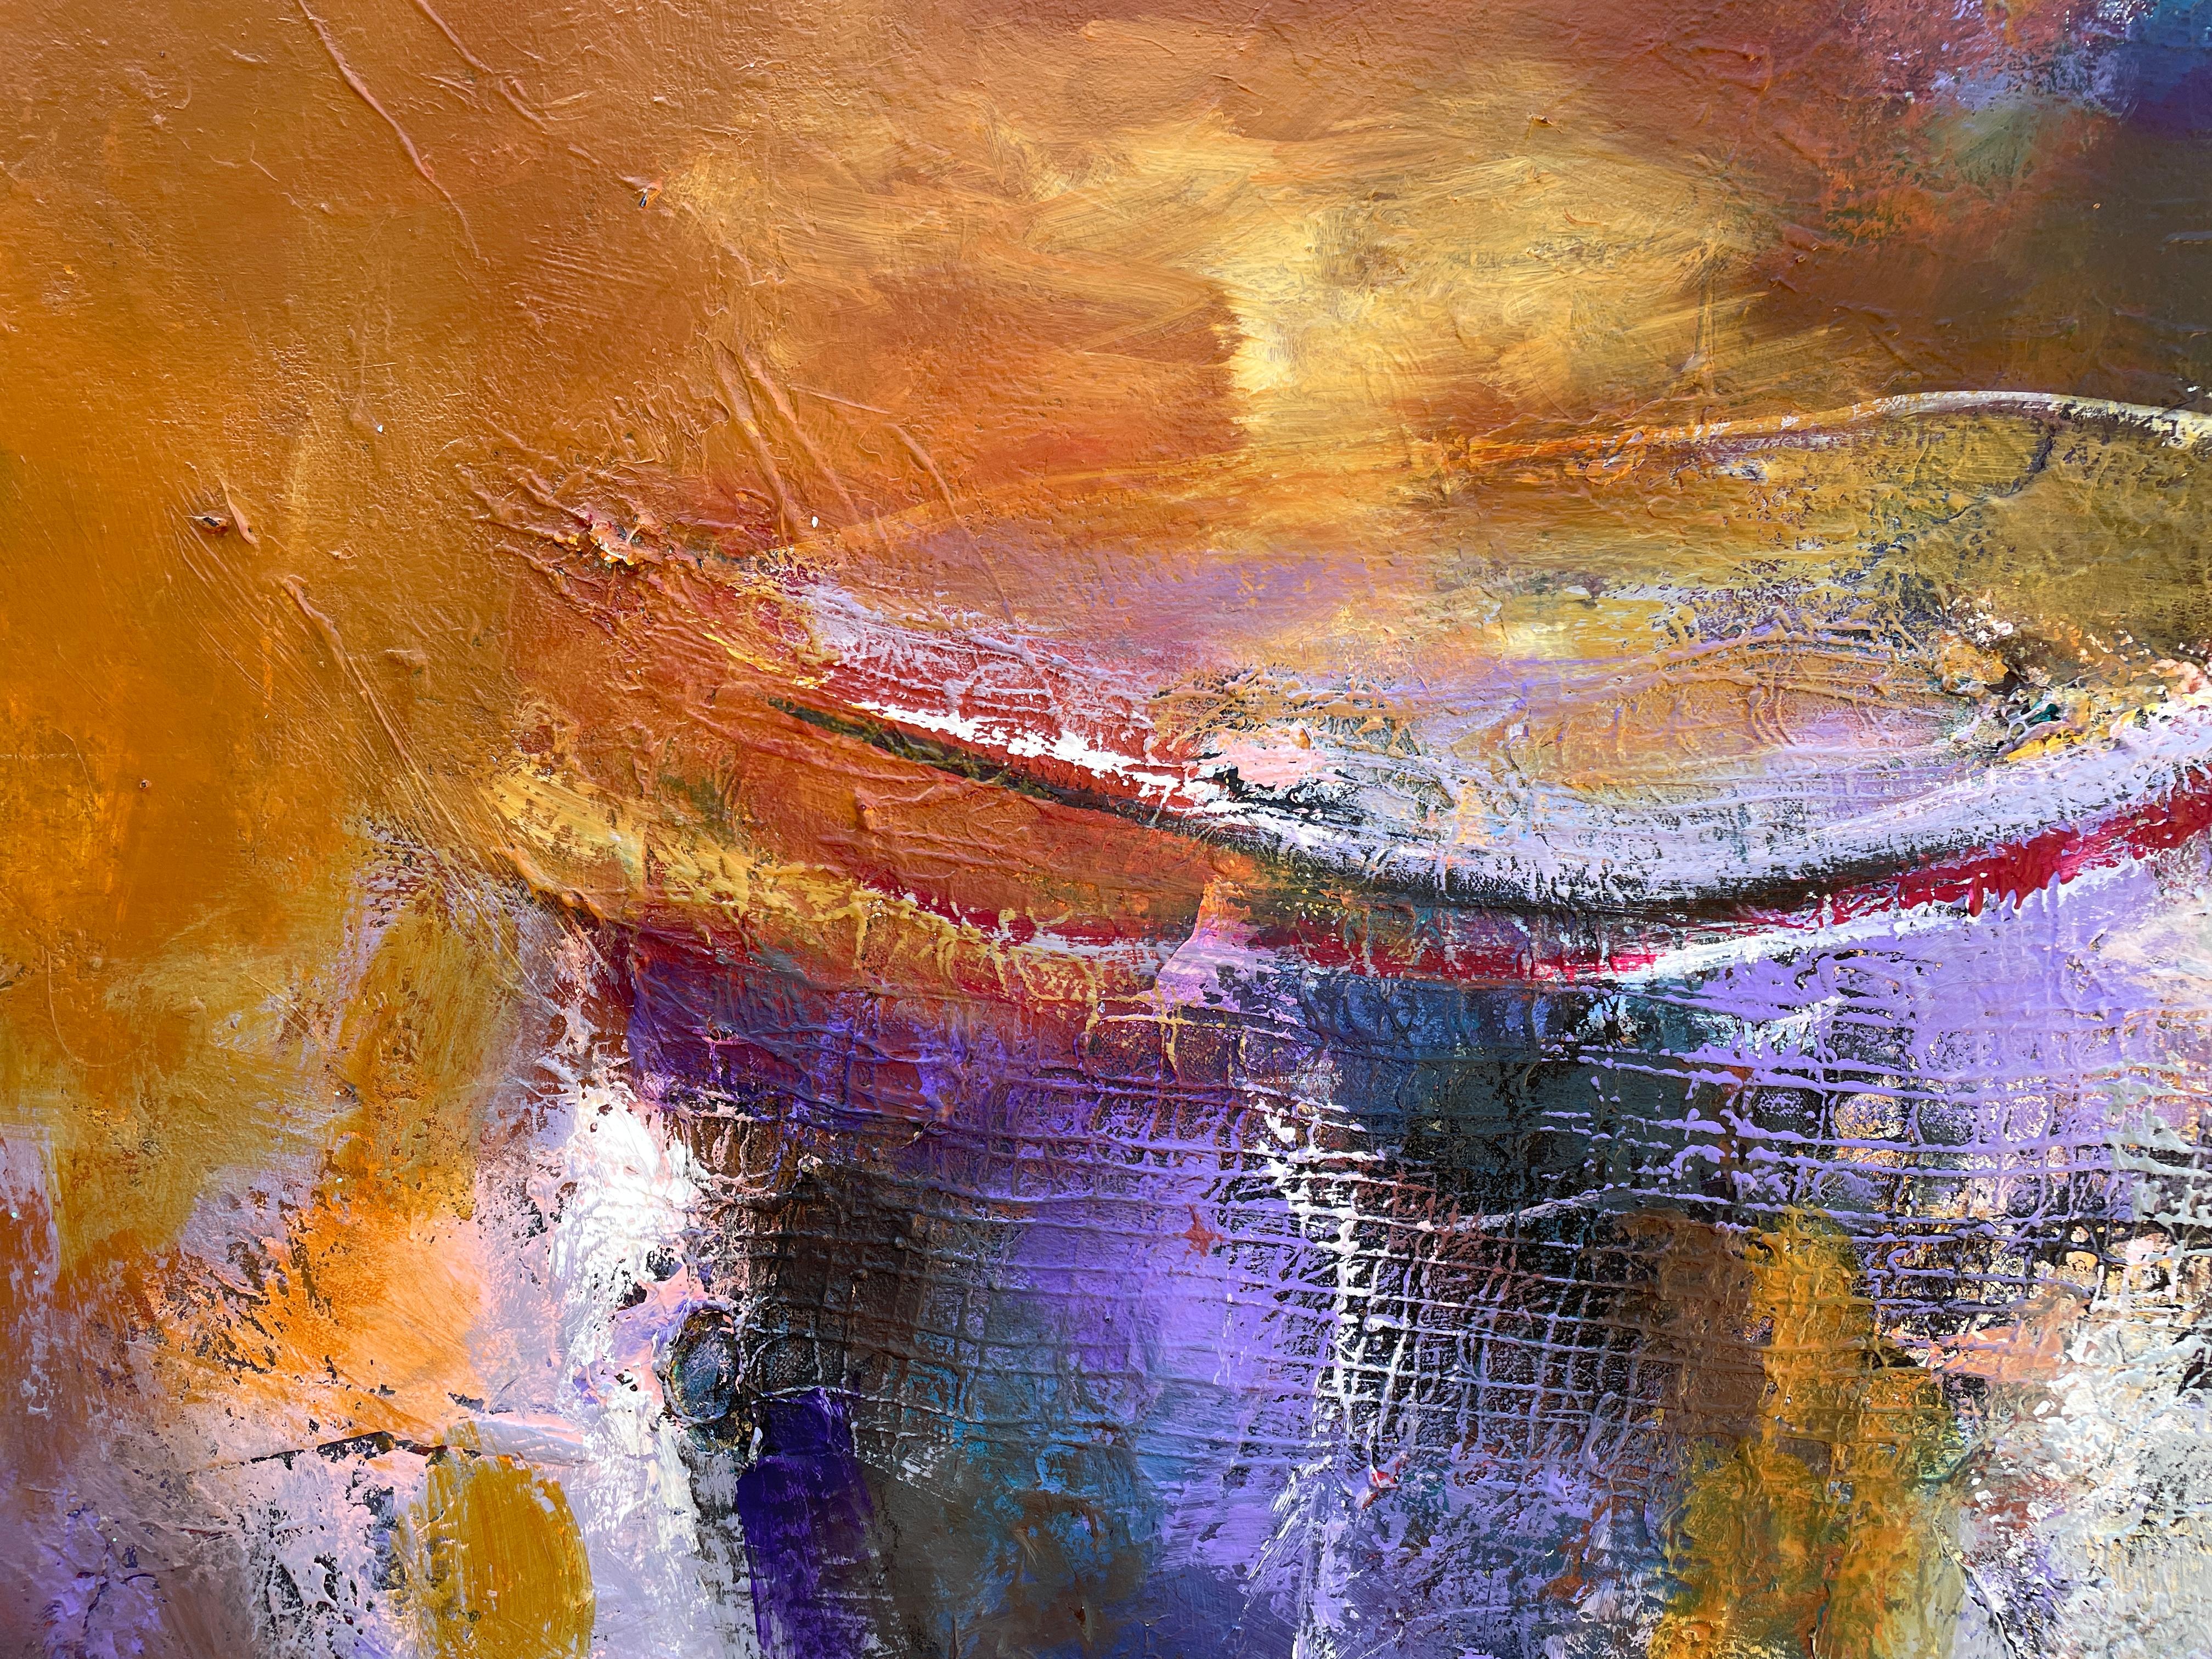 'Revive' by Mary Titus - Large Textured Abstract with Purple and Earth Tones 2